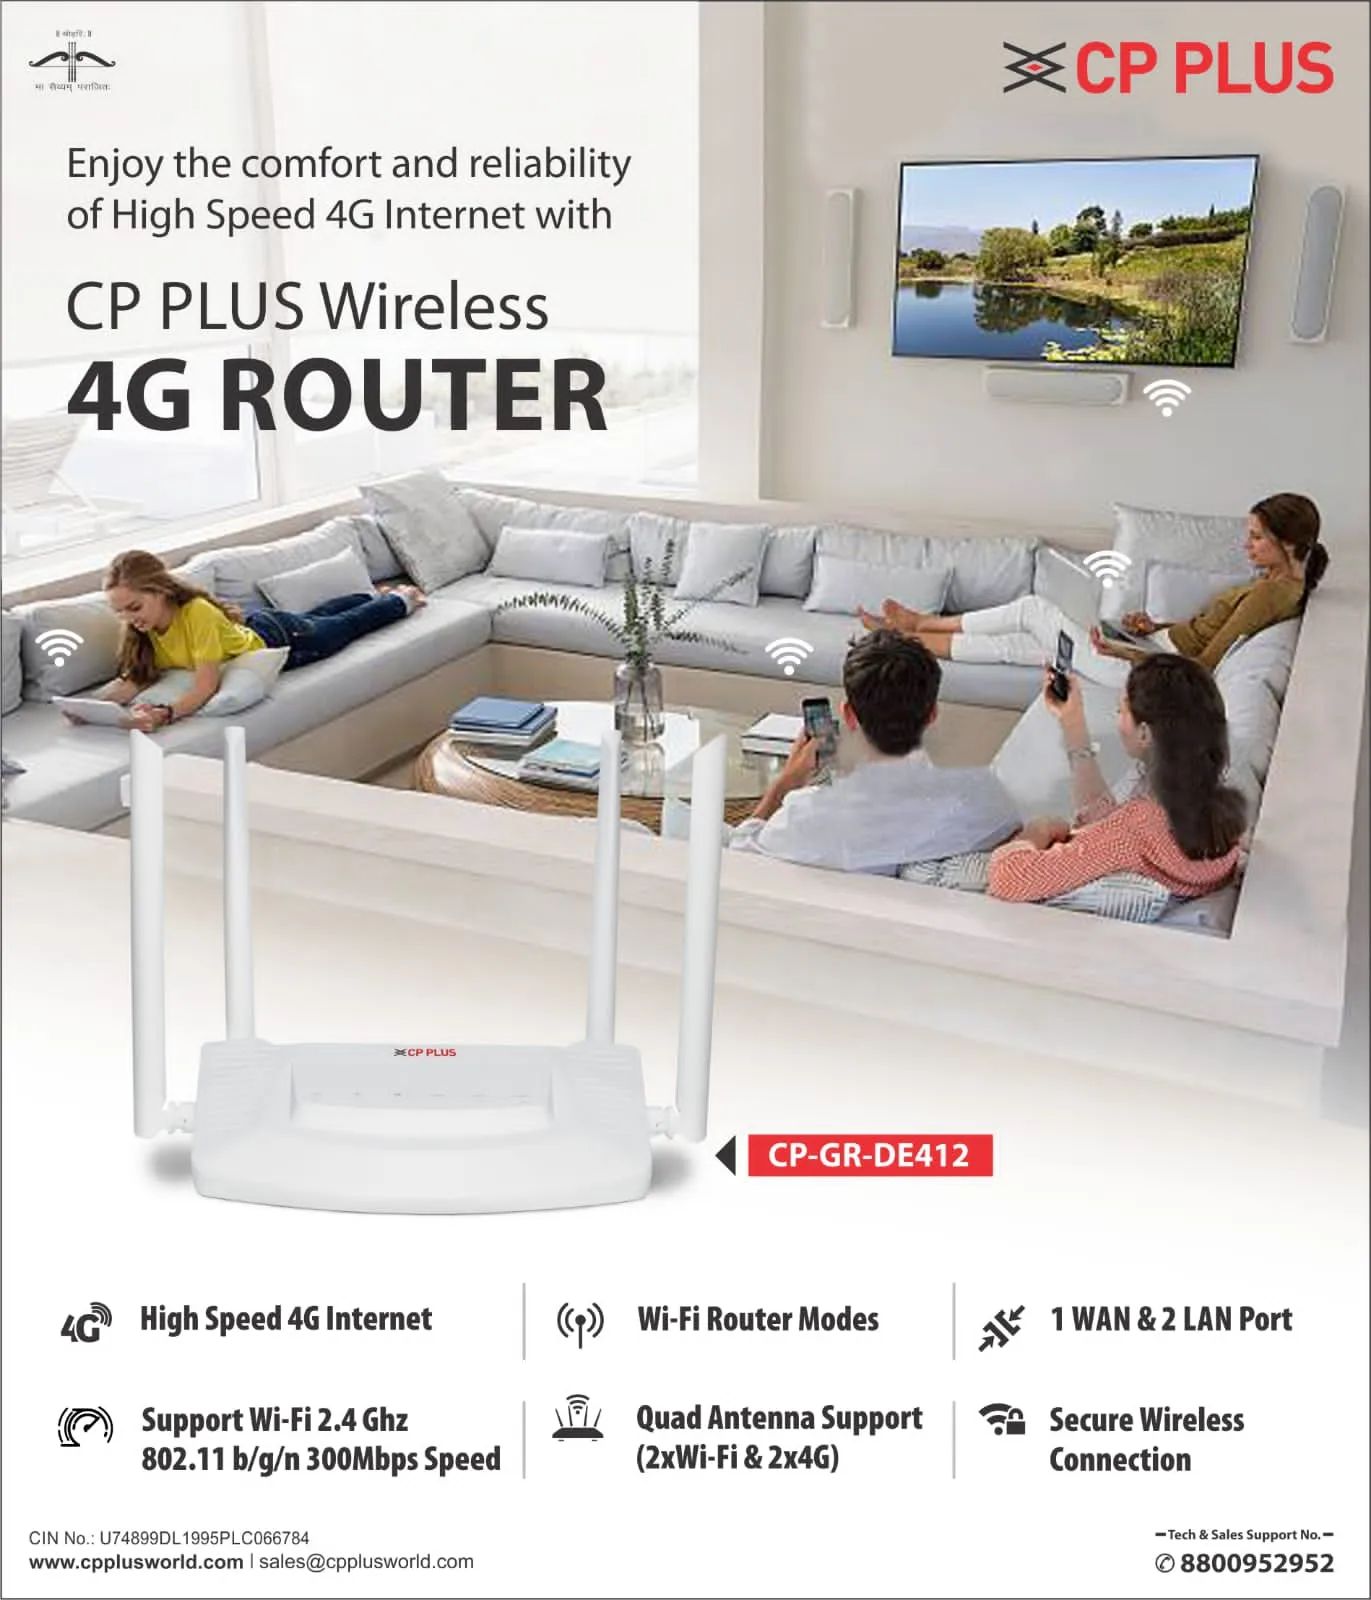 CP PLUS Wireless 4G Router